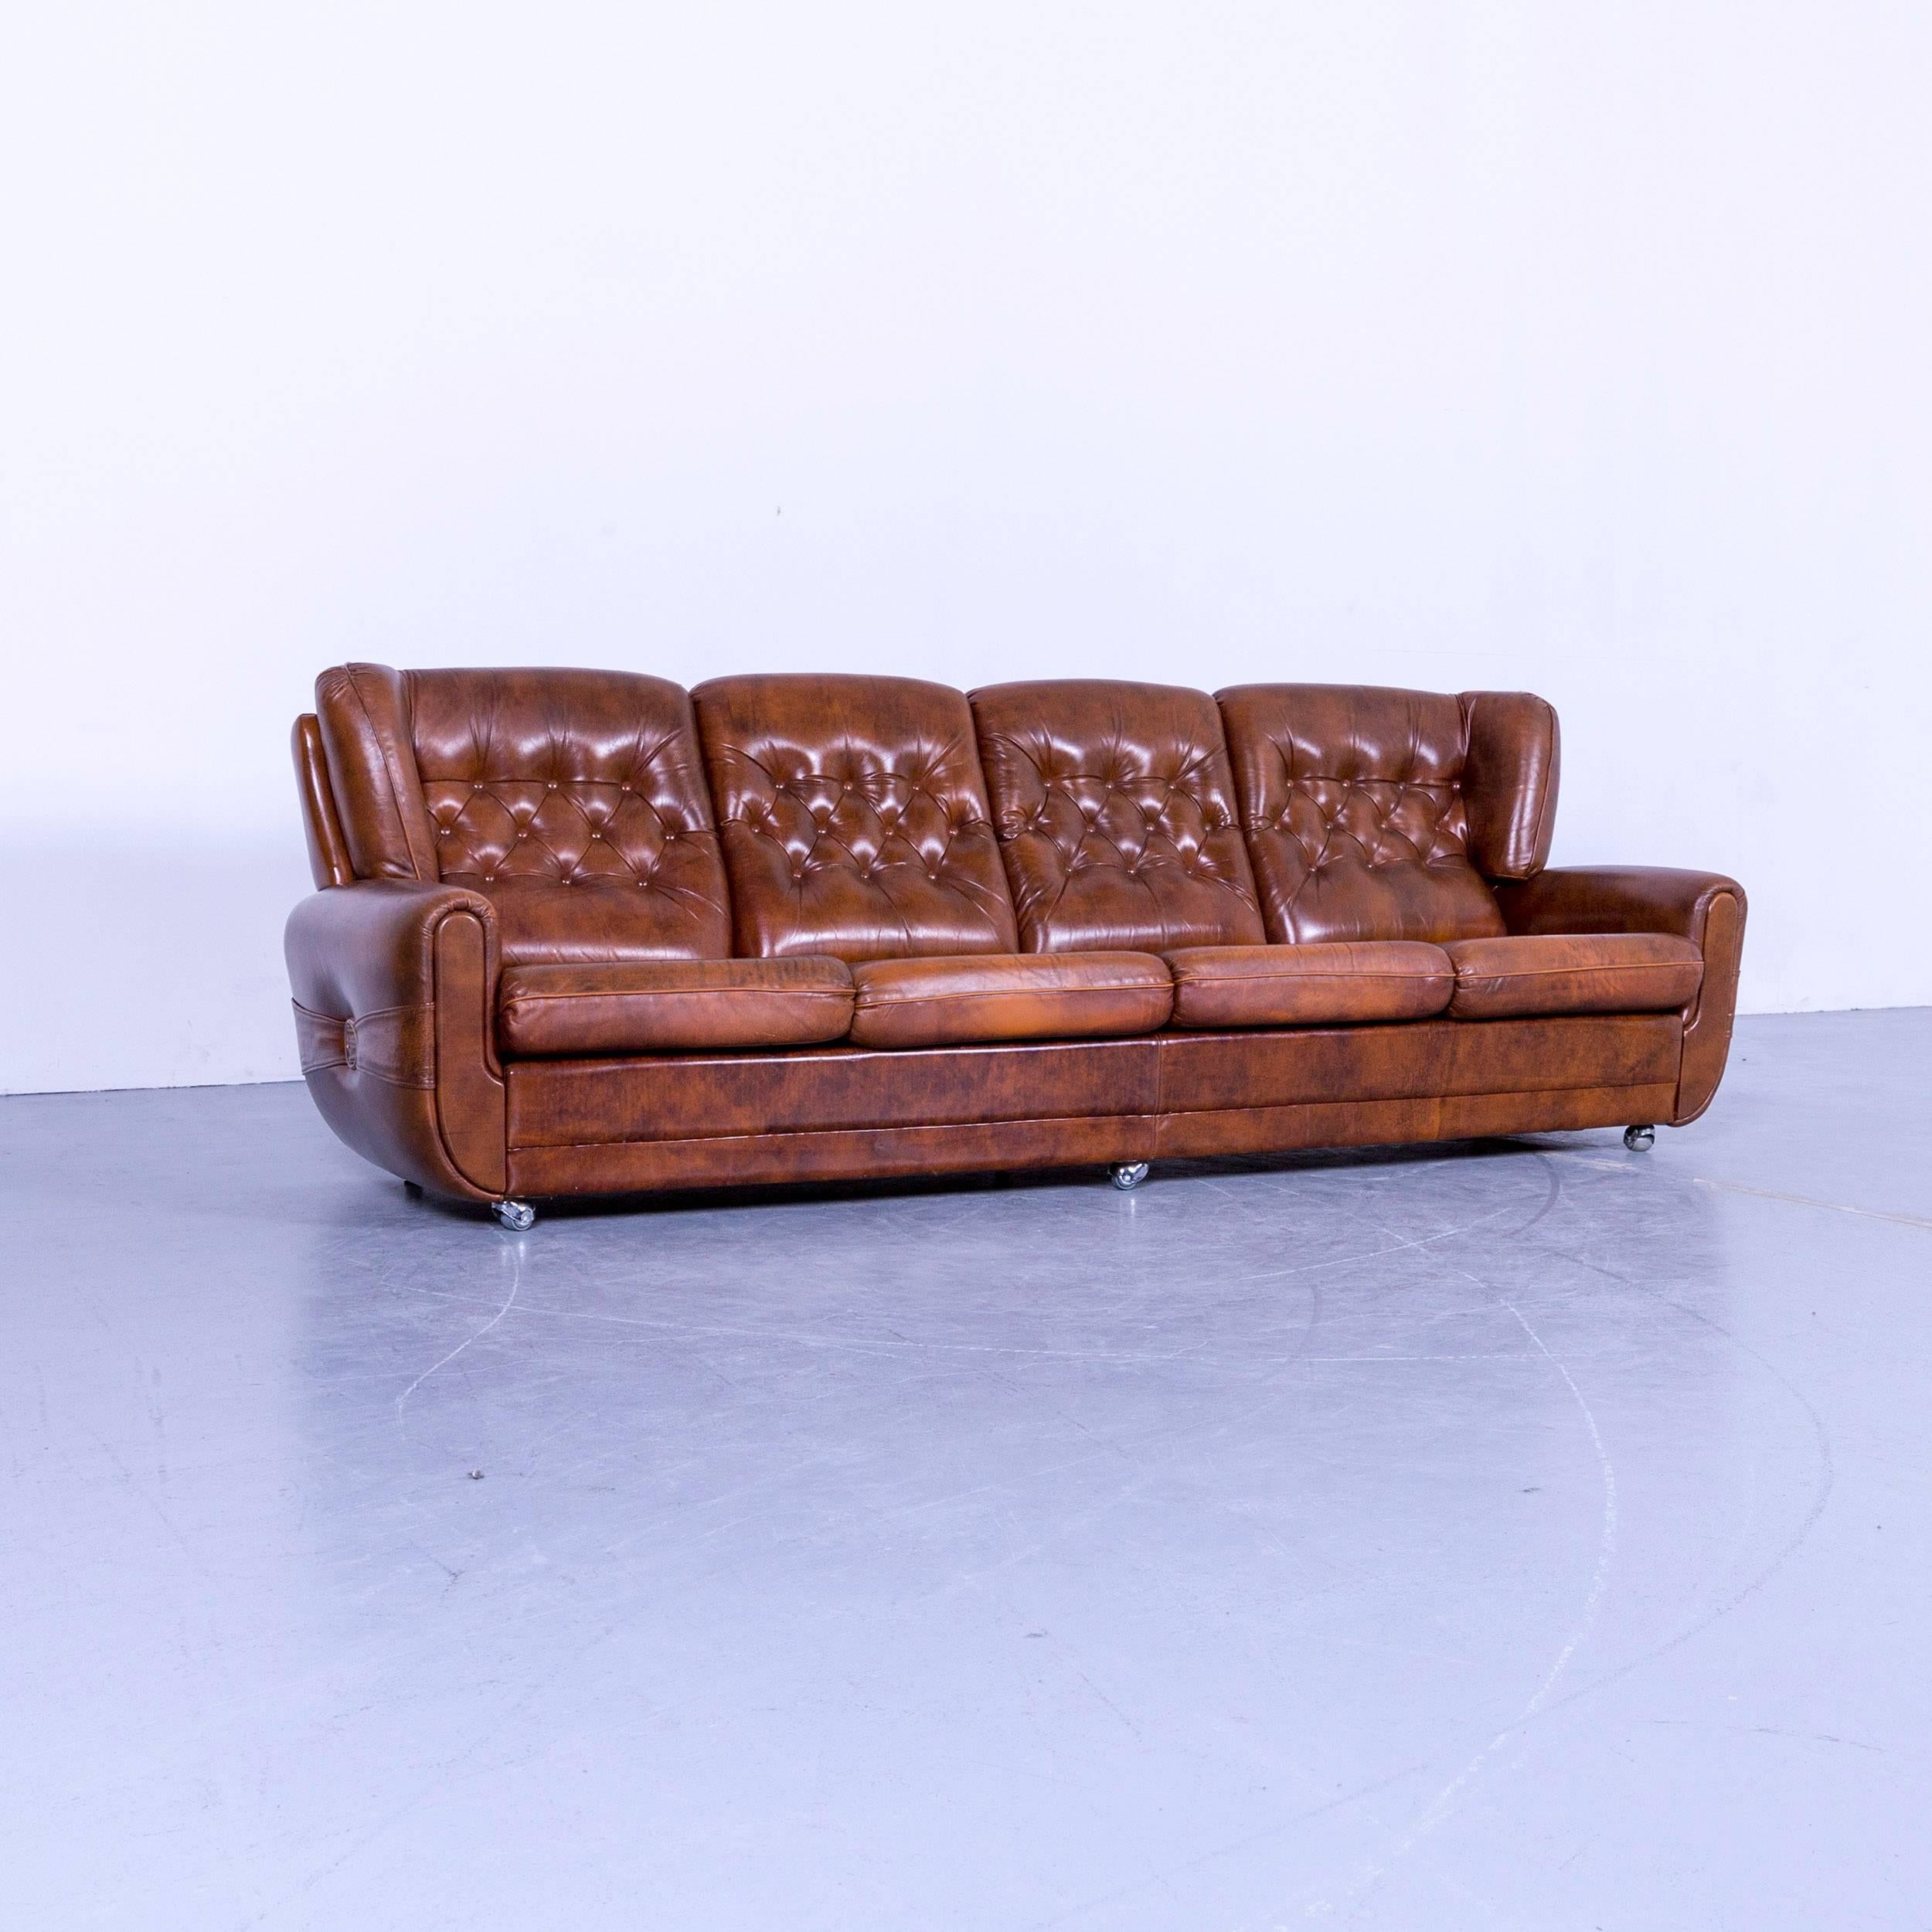 We offer delivery options to most destinations on earth. Find our shipping quotes at the bottom of this page in the shipping section.

An Chesterfield Leather Sofa Brown Four-Seater Couch Vintage

Shipping:

An on point shipping process is our